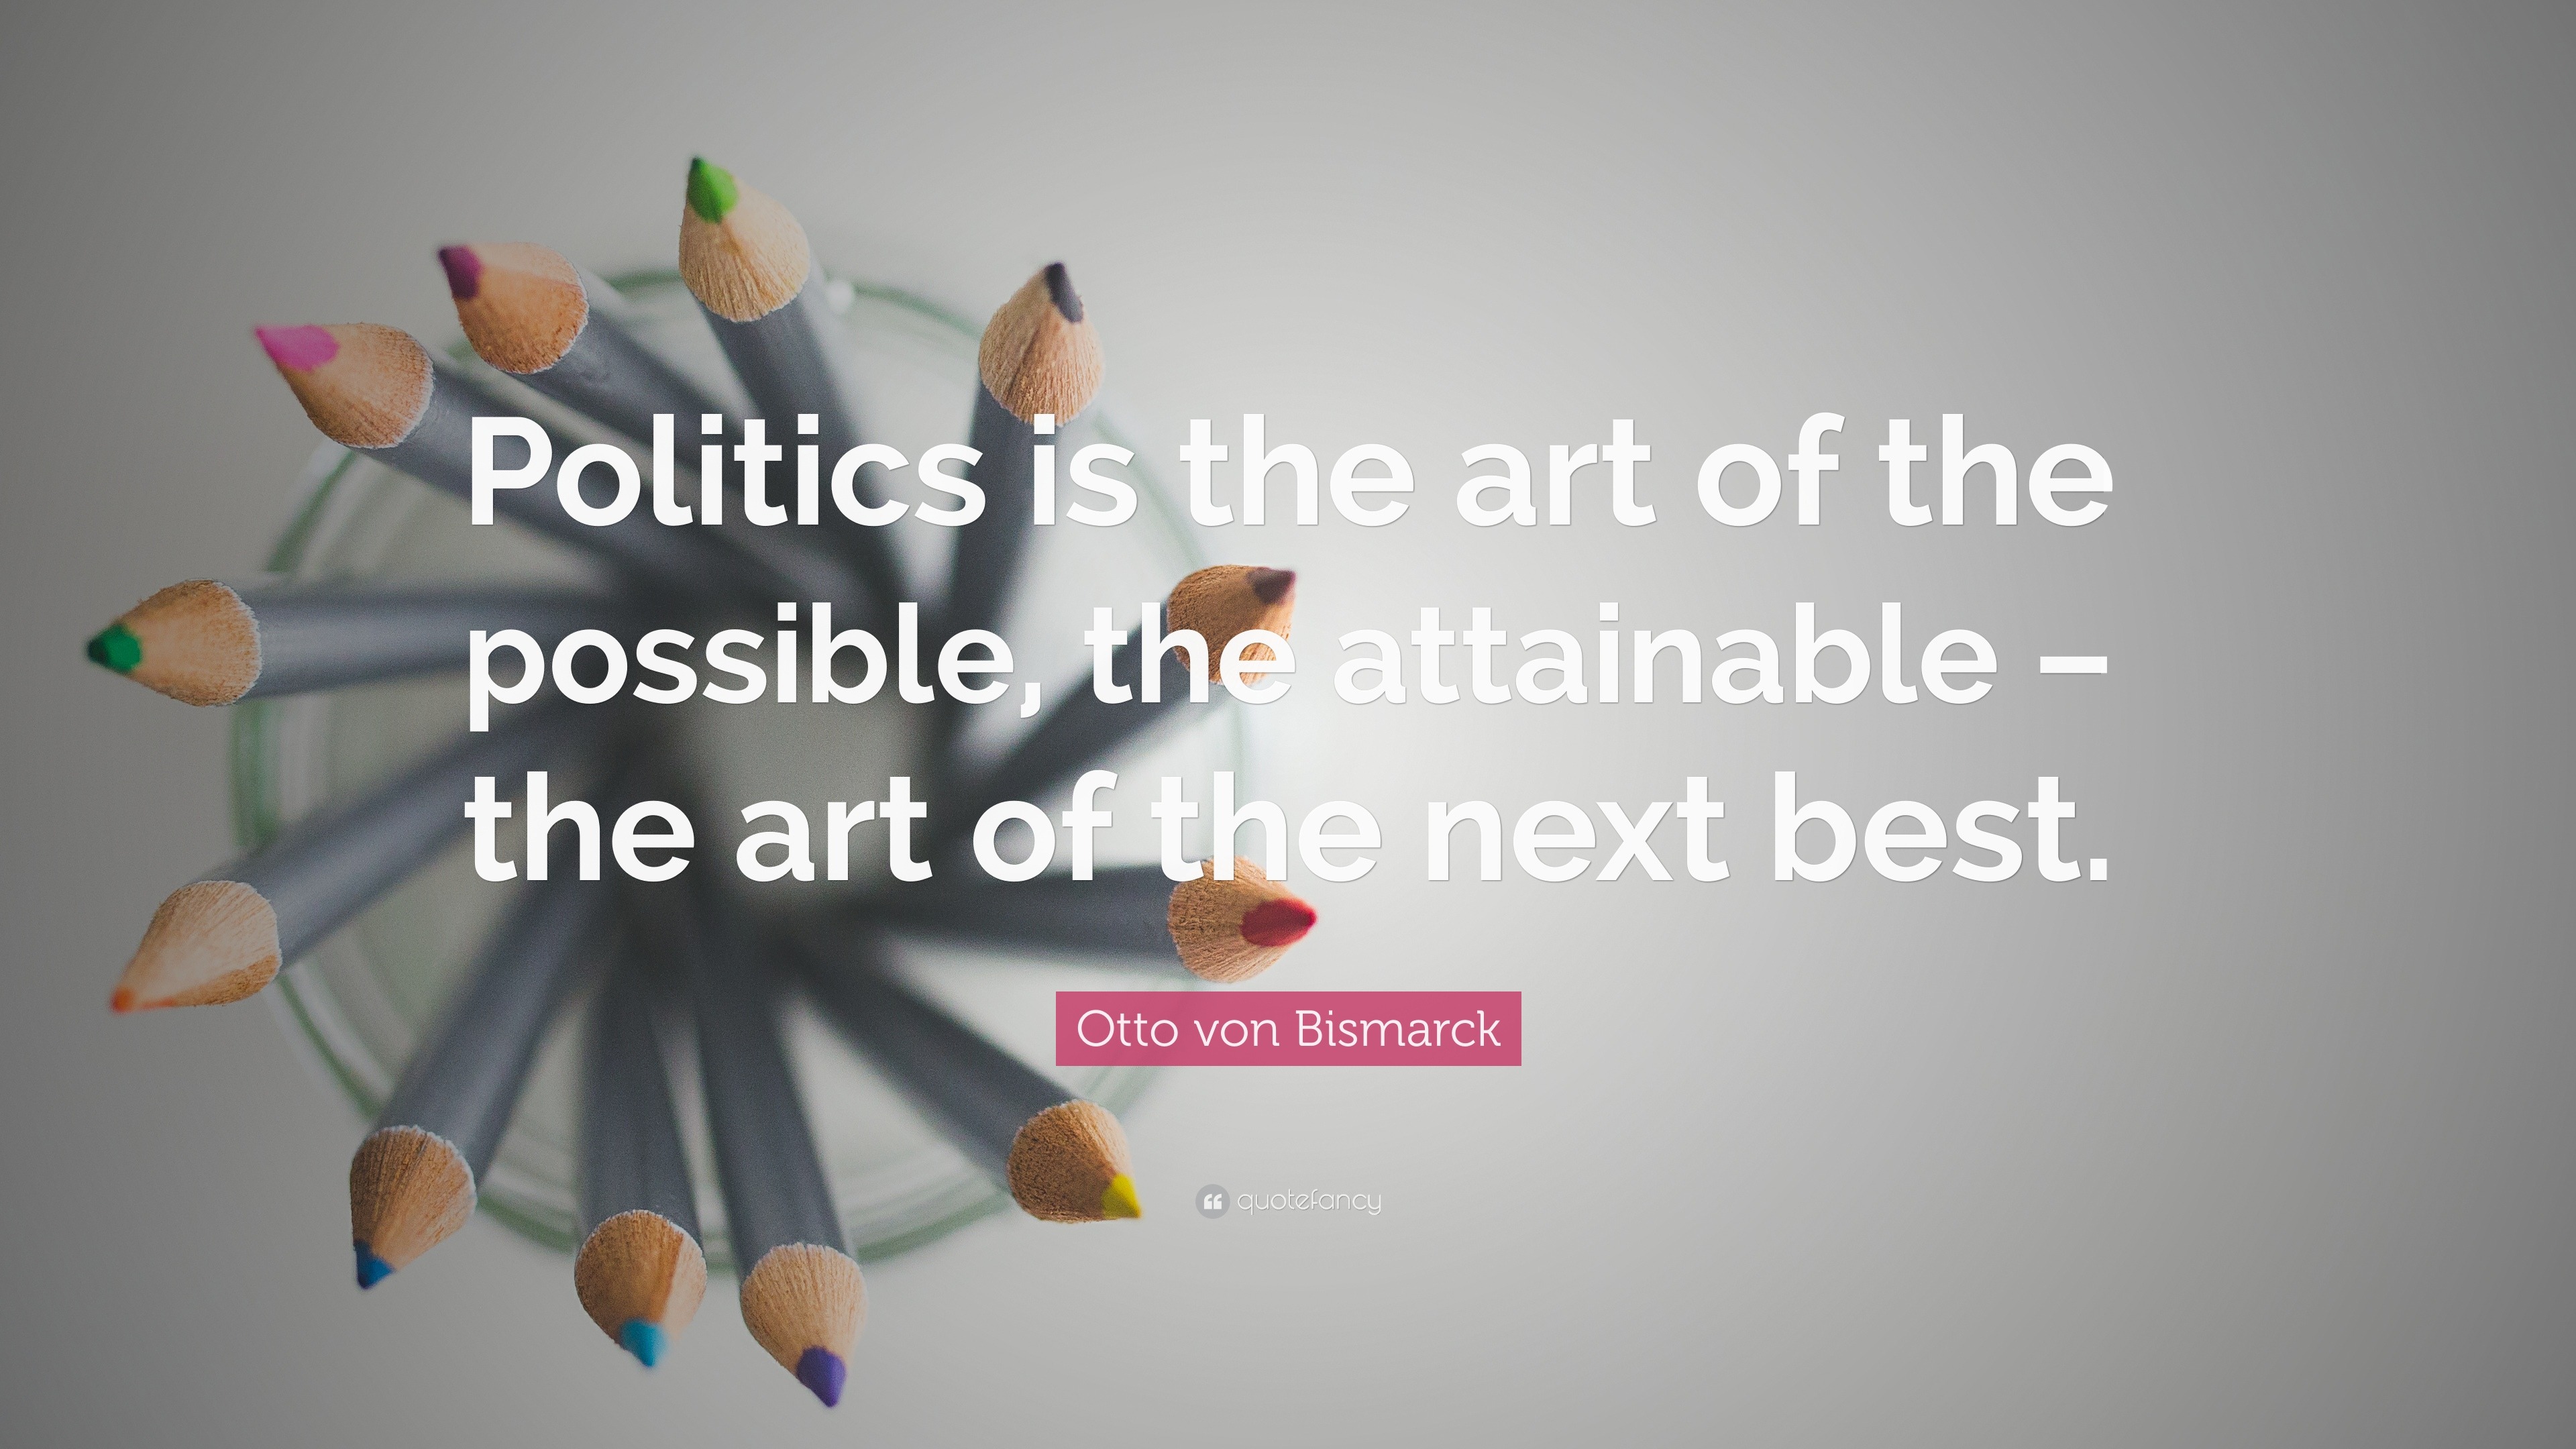 politics is the art of possible essay